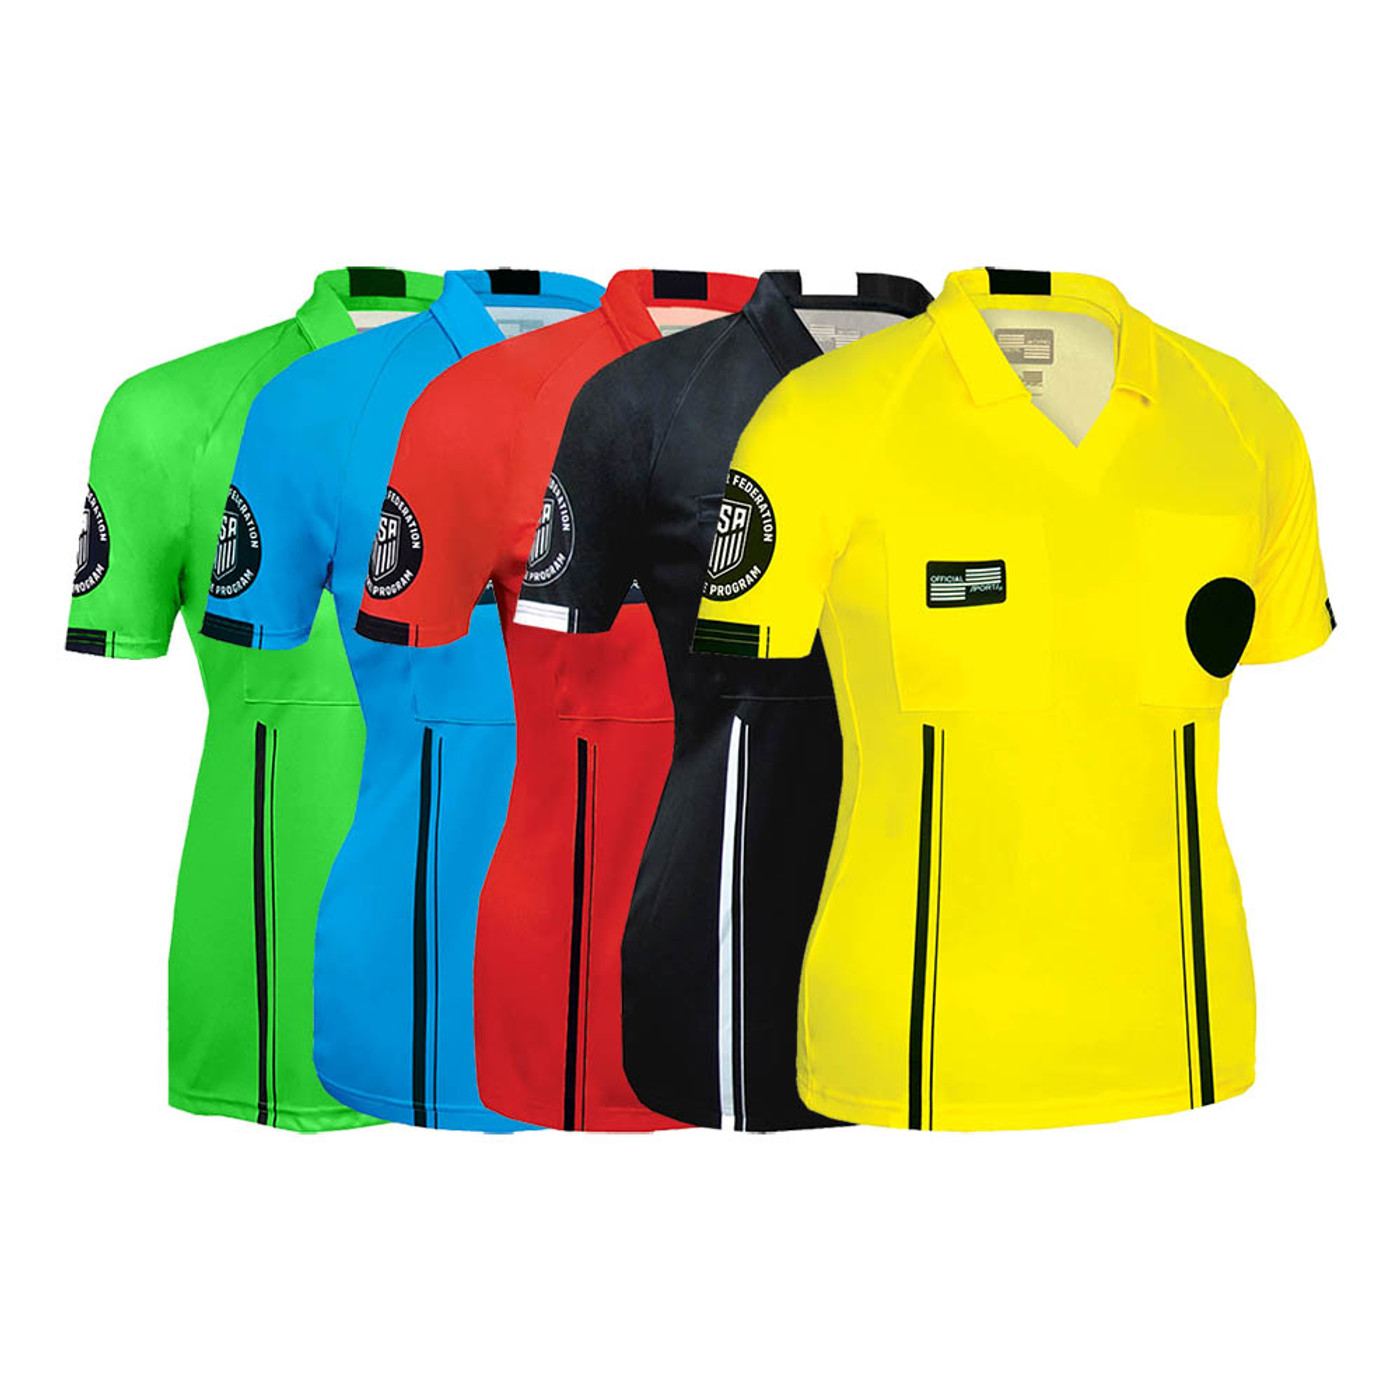 USSF Official Soccer Referee Jerseys Economy Style 